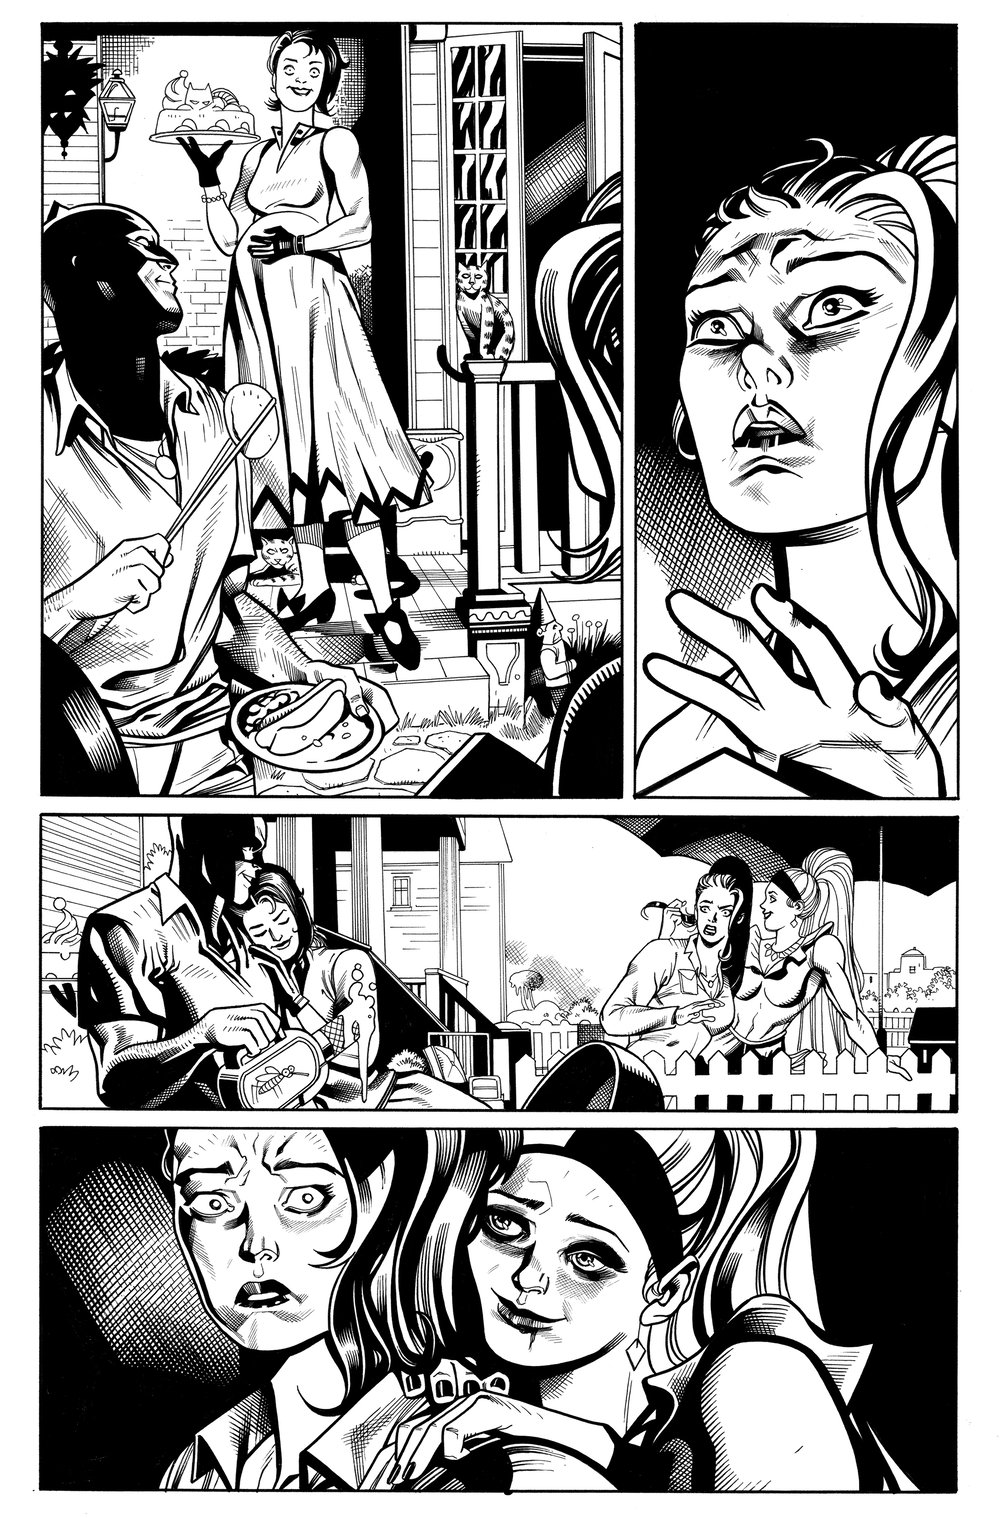 Image of Knight Terrors: Poison Ivy #1 PG 9